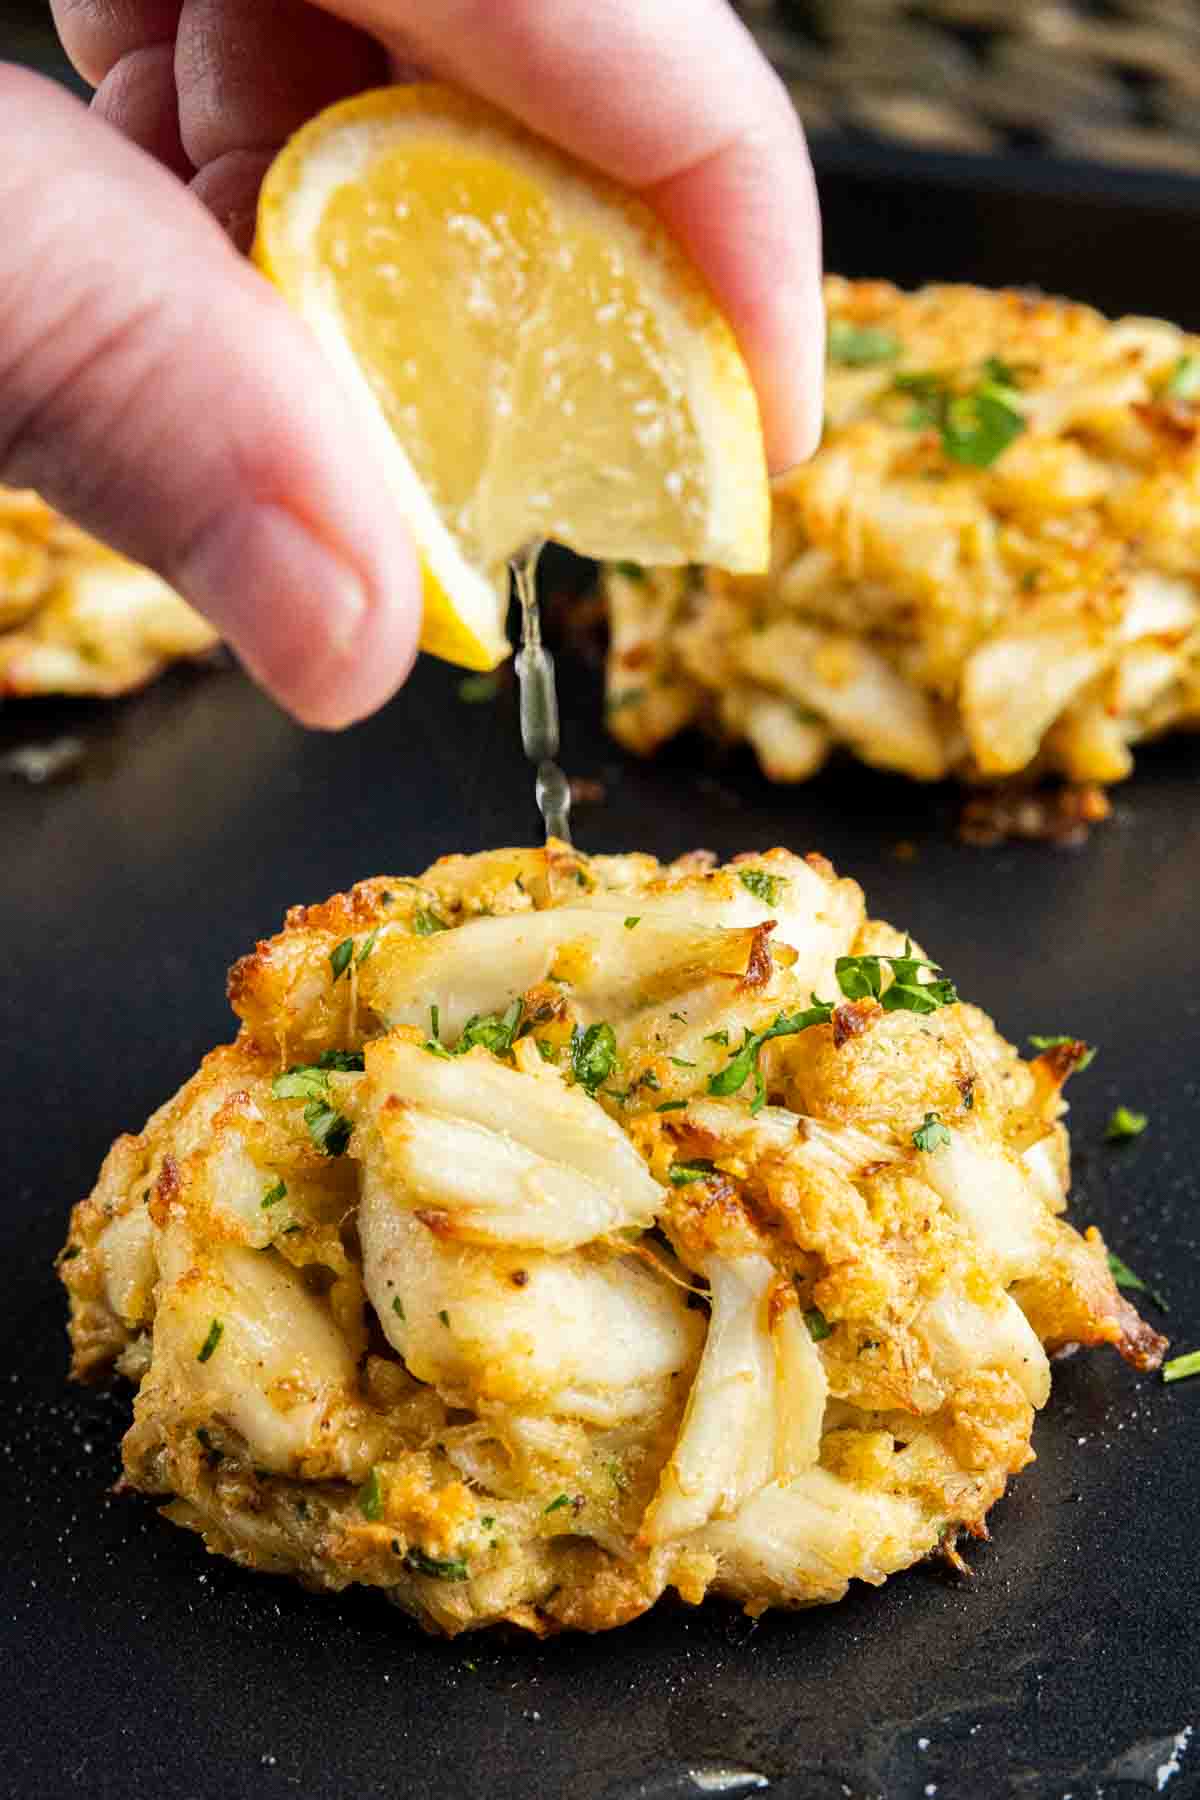 A person is drizzling lemon juice on some Maryland Crab Cakes.